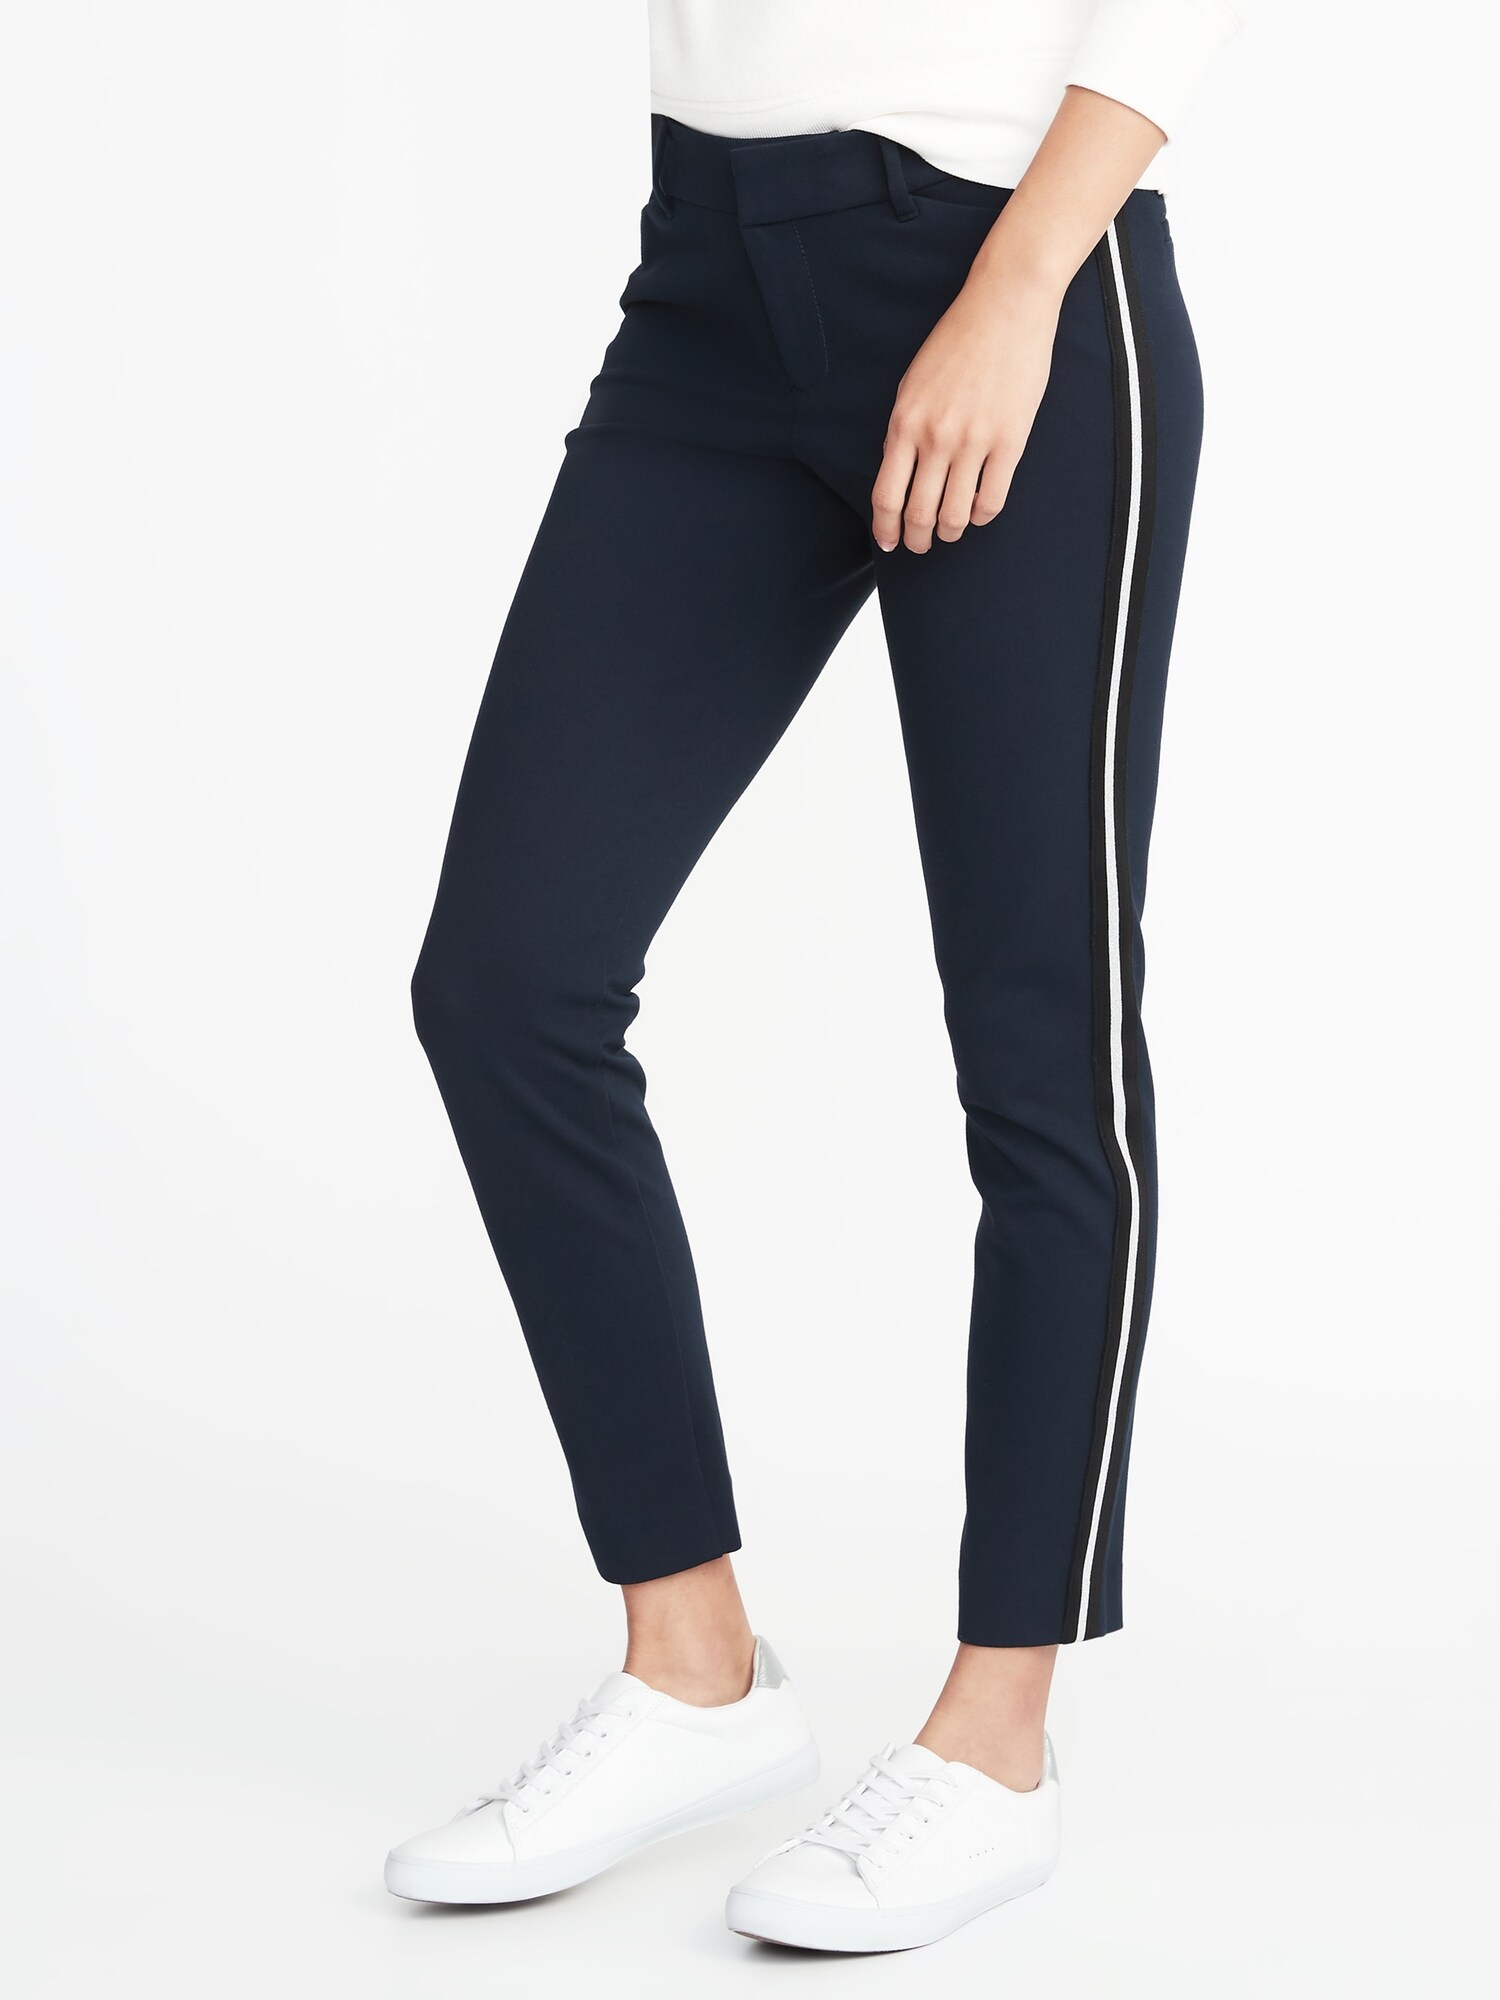 The Pixie Mid-Rise Ankle Pants, Old Navy